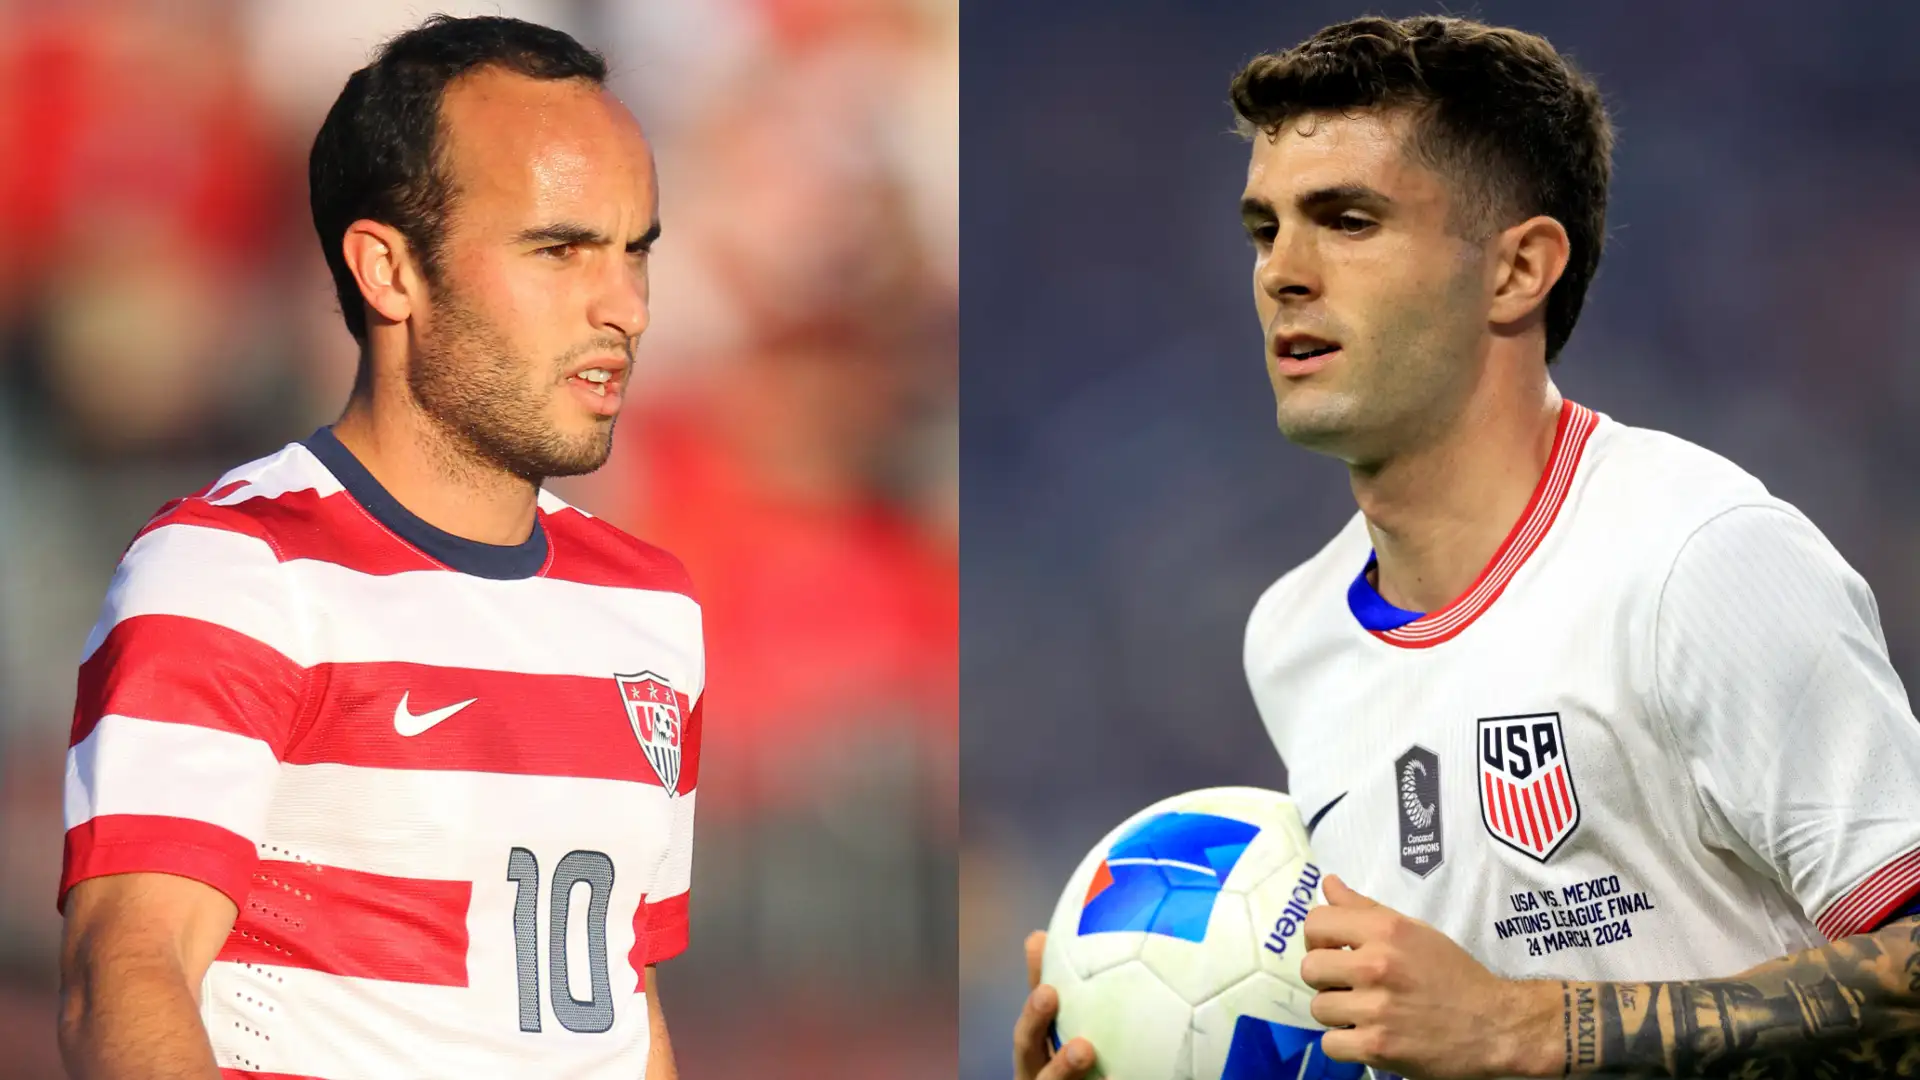 GOAT of the USMNT? Christian Pulisic tipped to become ‘better player’ than Landon Donovan after posting career bests at AC Milan